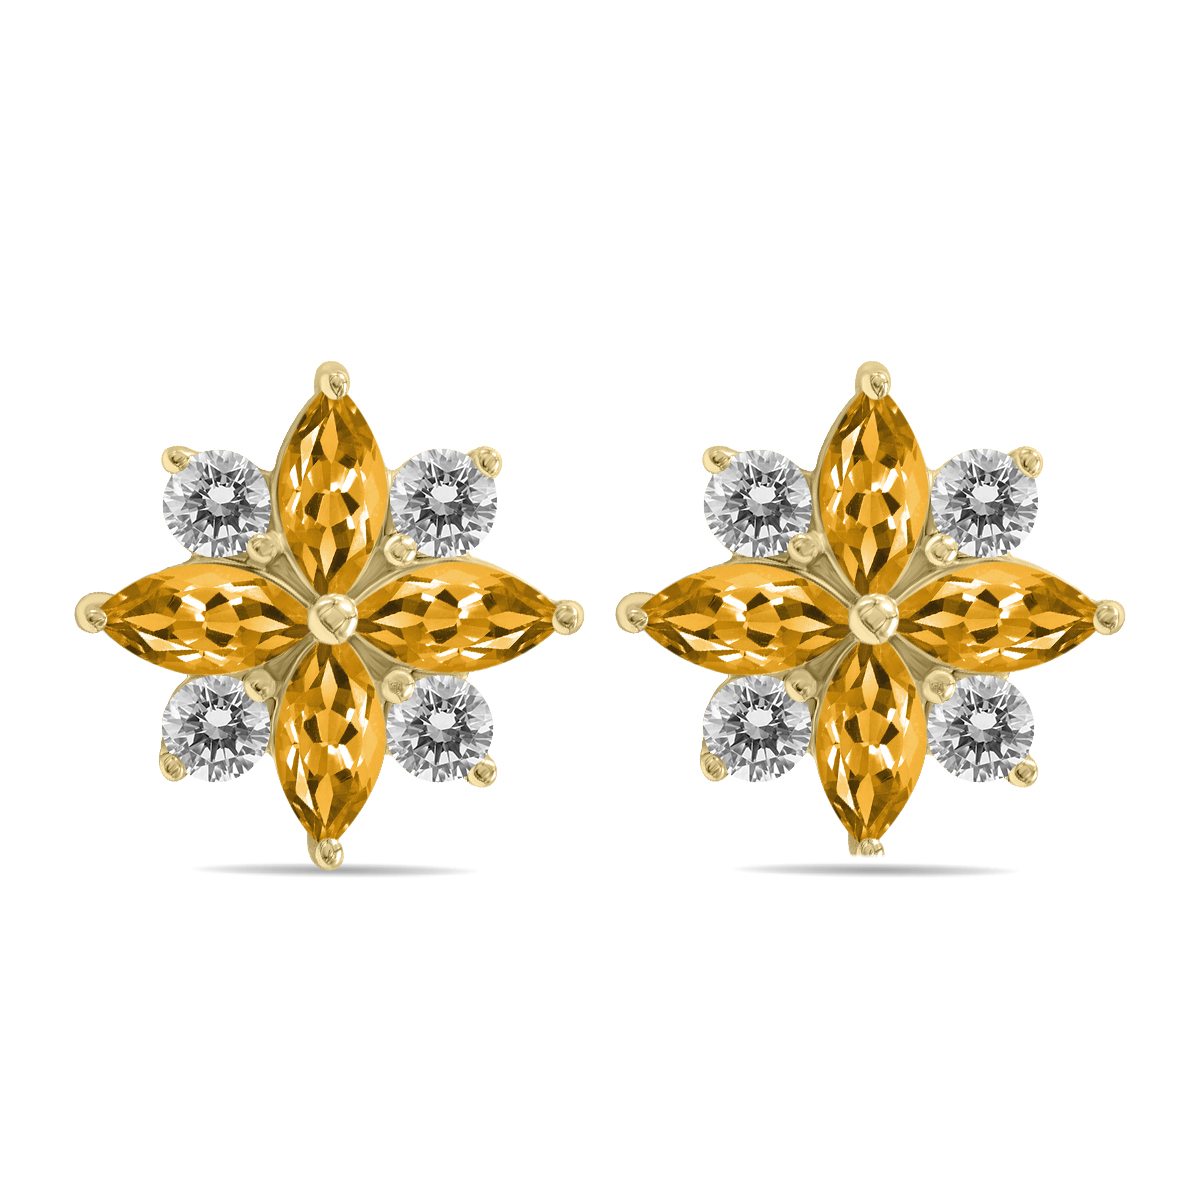 Image of 1 Carat TW Citrine and Diamond Flower Earrings in 10K Yellow Gold